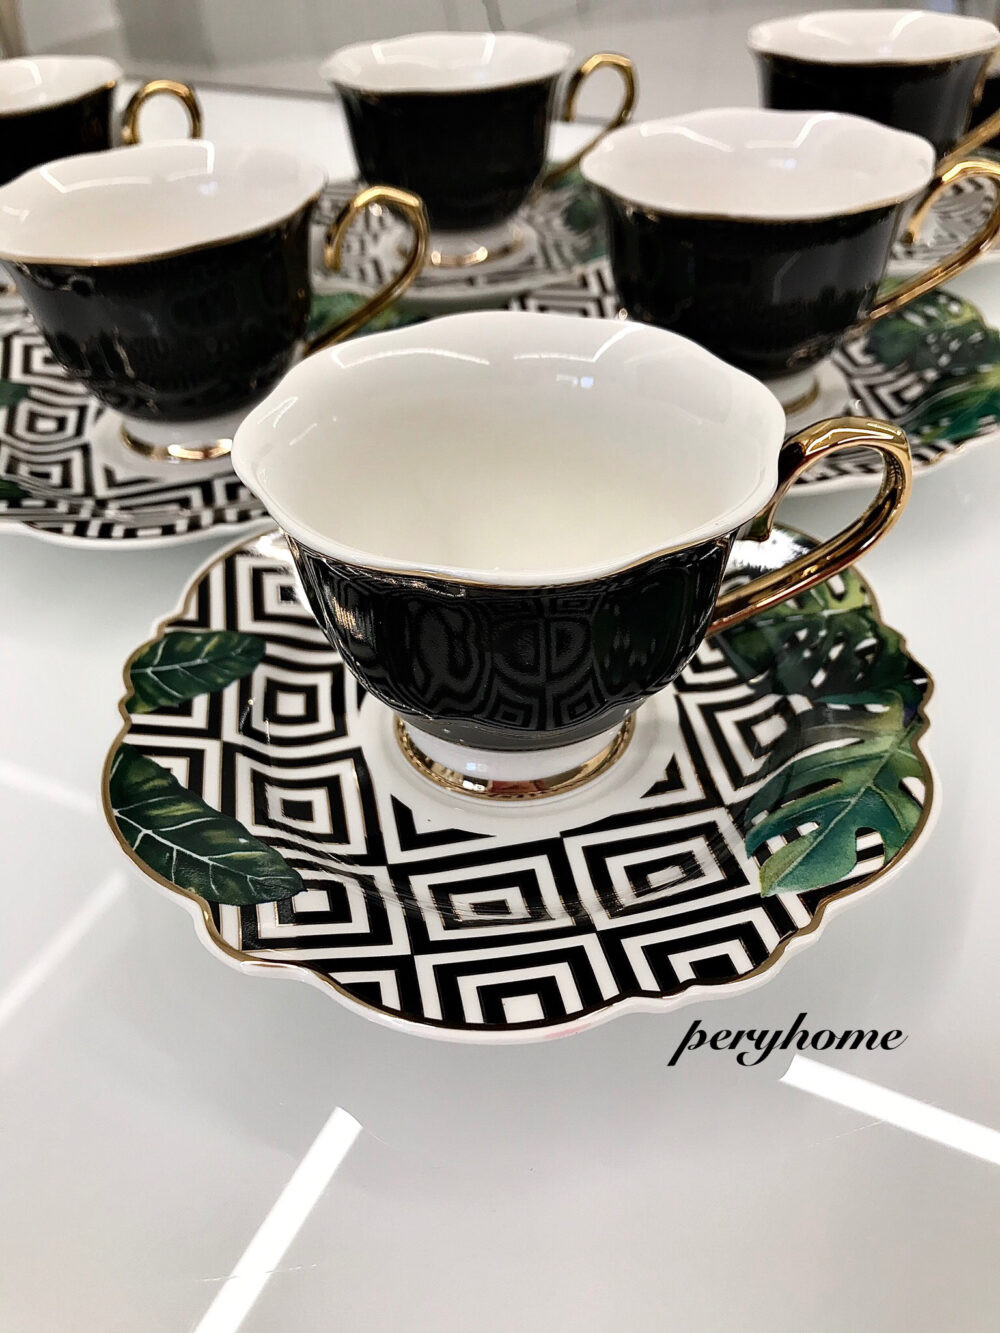 Peryhome Product